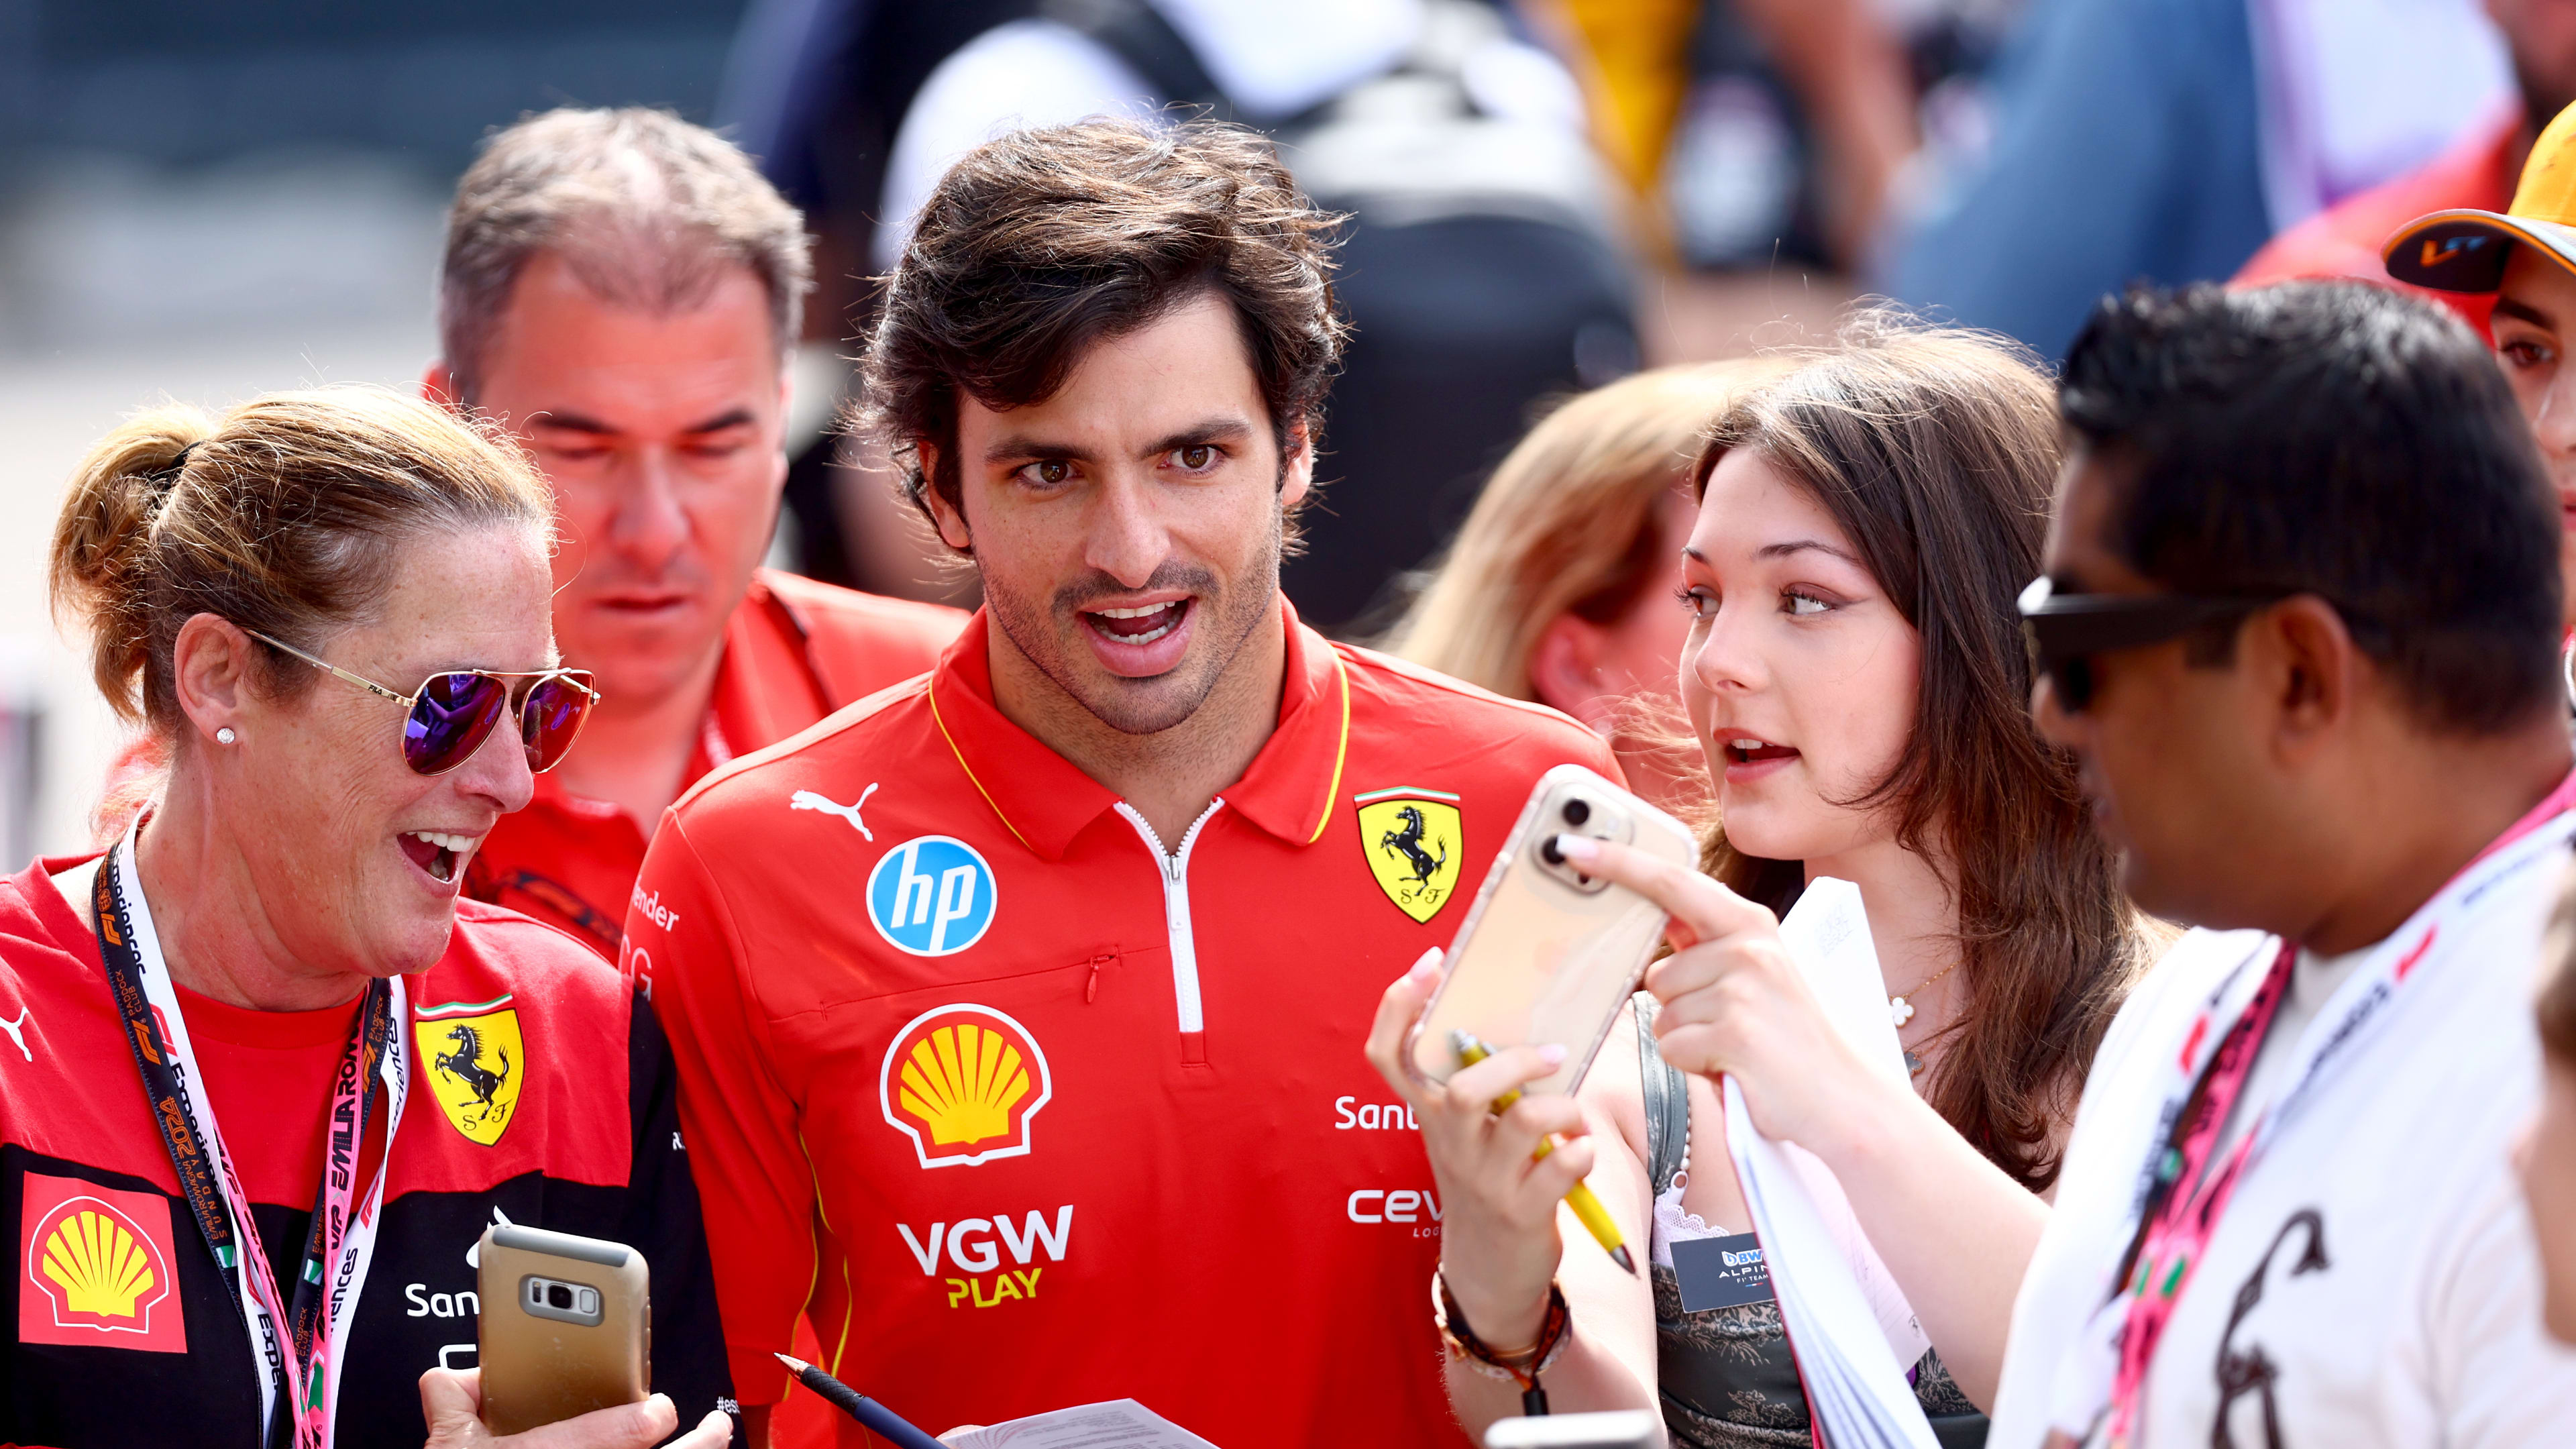 OFFICIAL GRID: Ferraris promoted at home and Alonso starts from Imola pit lane